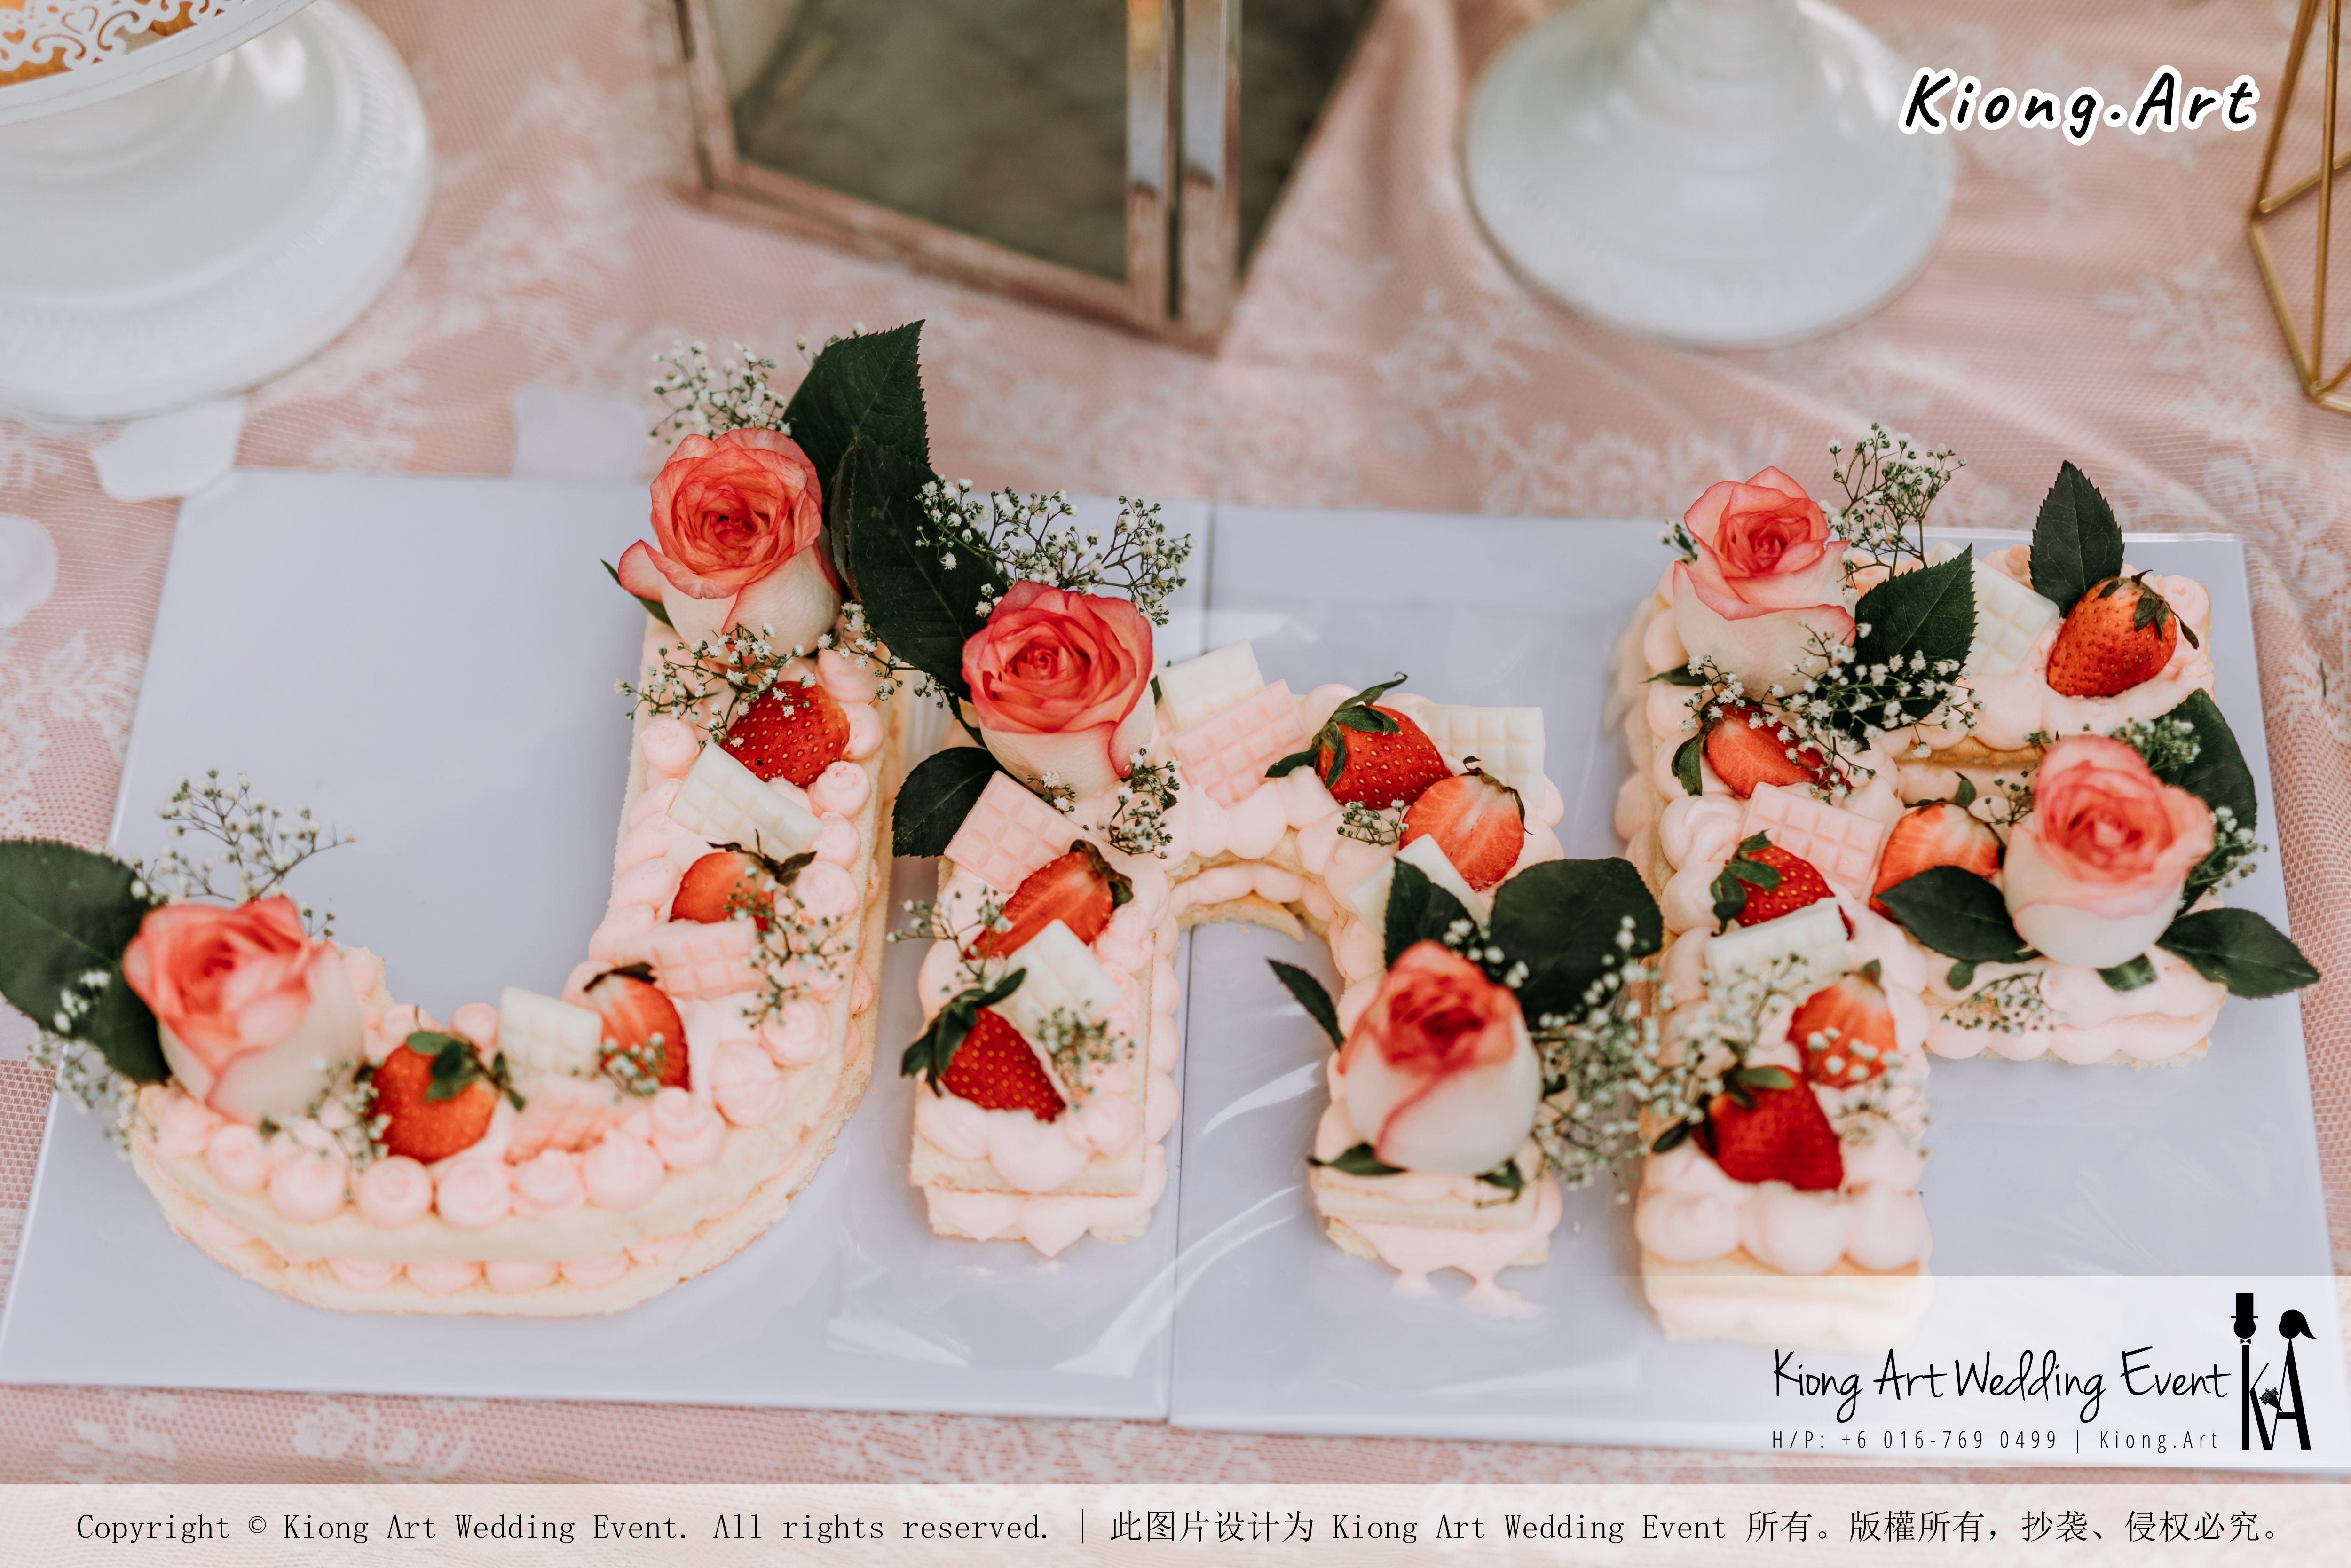 Malaysia Kuala Lumpur Wedding Decoration Kiong Art Wedding Deco Eternal Registration of Marriage Ceremony Open-air Party of Jack and Fish ROM at Kluang Container Hotel A14-A01-083